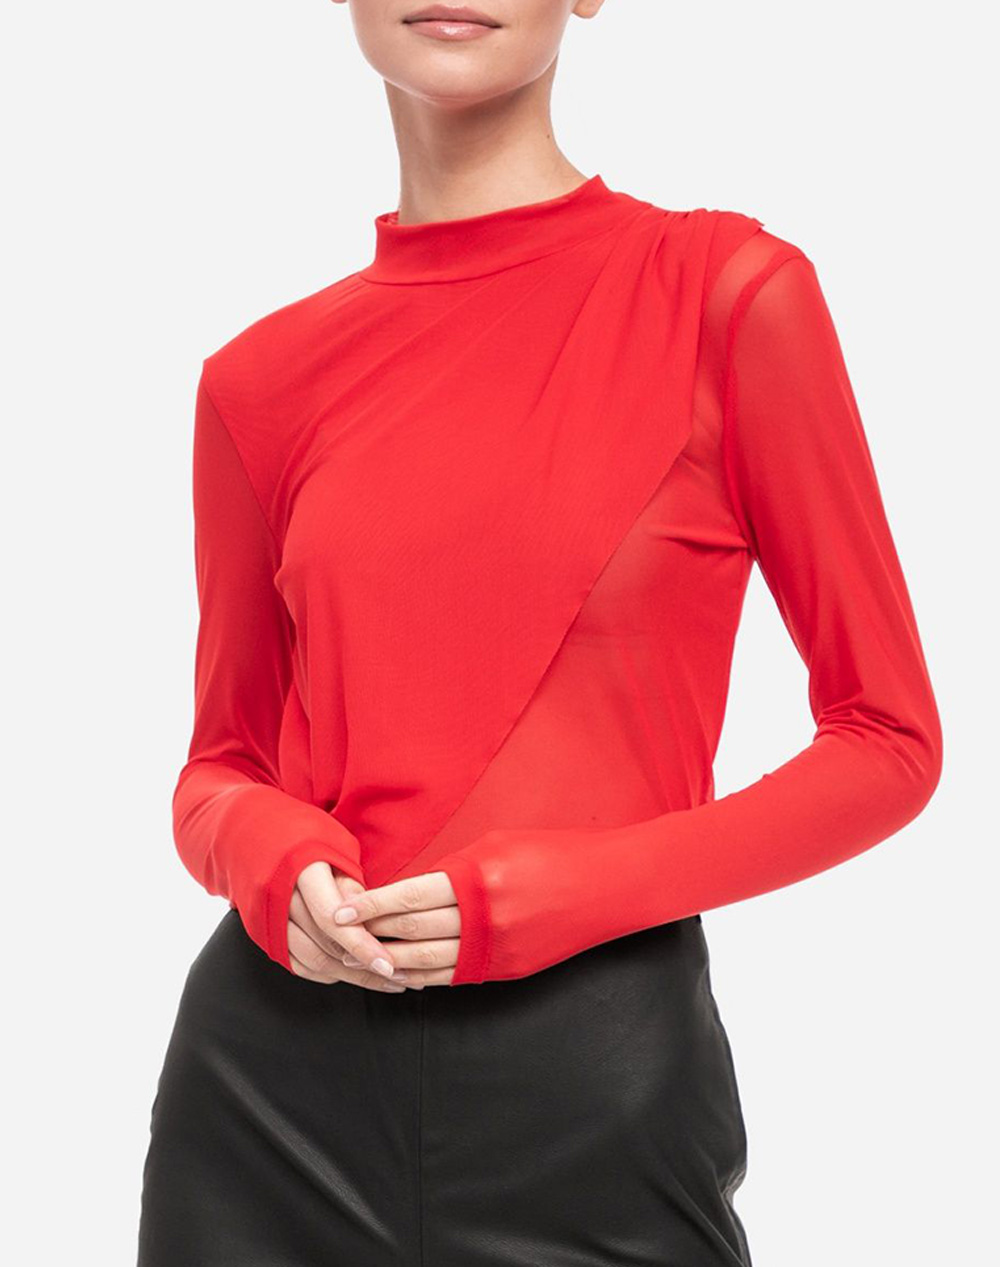 NA-KD 10 EXTRA LAYER MESH TOP ΓΥΝΑΙΚΕΙΟ 1017-000738-RED Red 9010ANAKD3460001_9699